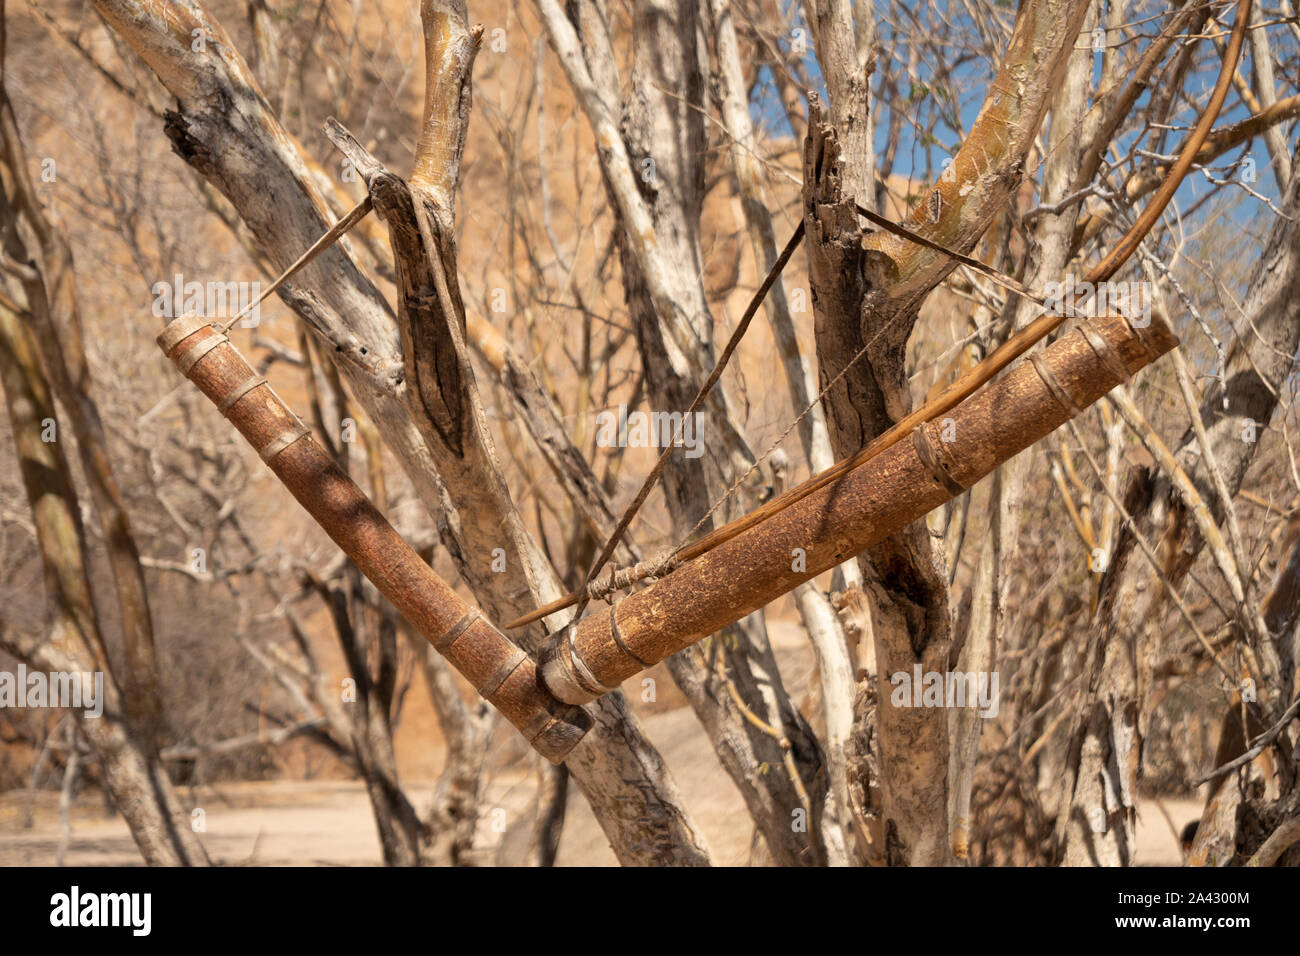 Bow and Quiver with Arrows of a San or Bushman Hunter Hanging on a Dry Bush, No People Stock Photo